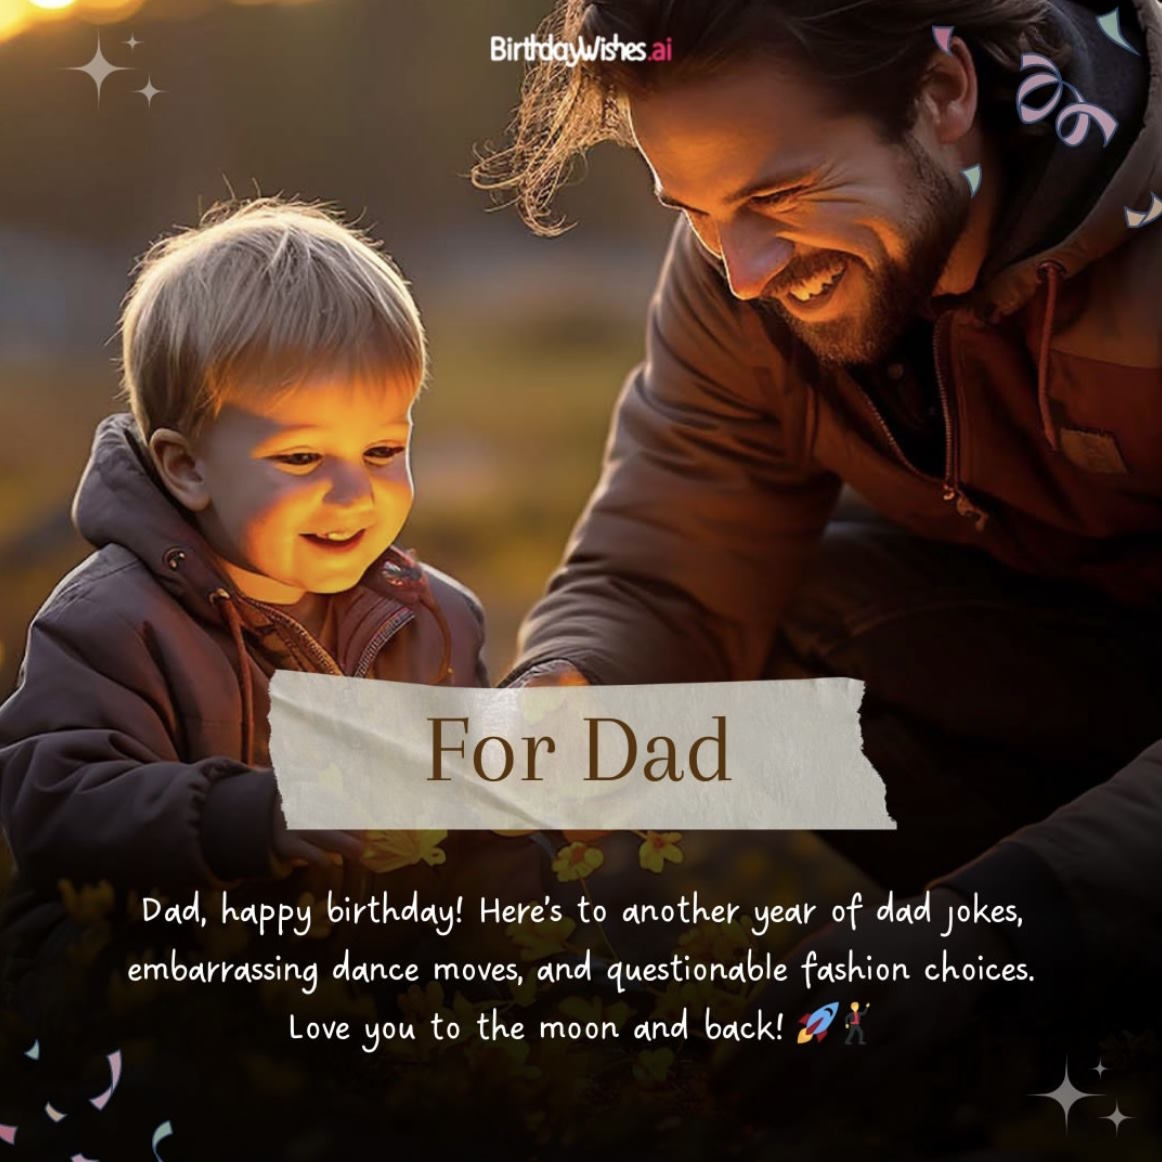 Birthday Wishes for Dad - Dad with a boy